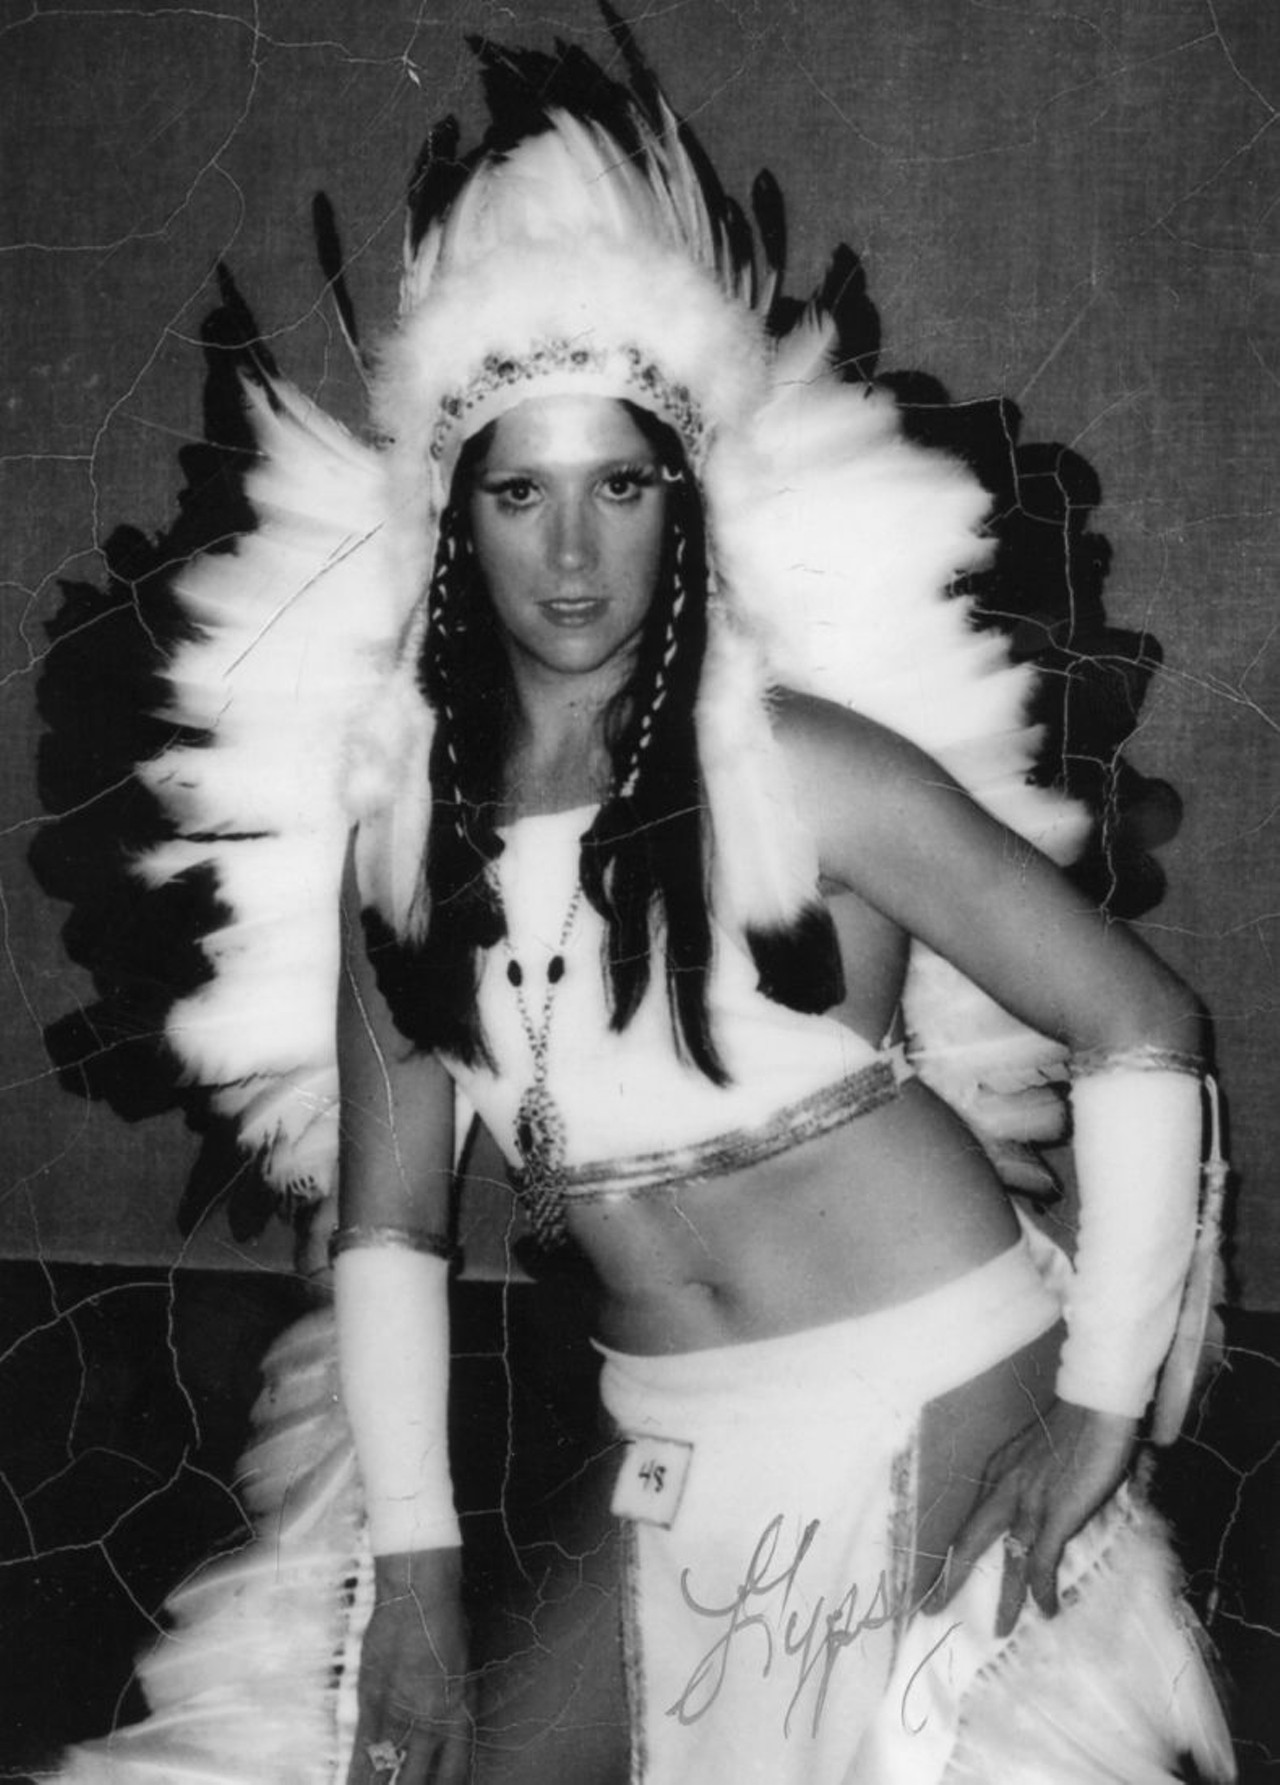 Lee Maynard. Performing as Gypsy Lee, Maynard entertained audiences in St. Louis and across the Midwest during the early 1970s. He won the title of Miss Gay Illinois 1975. An expert seamstress, Maynard made many of his own costumes, including a Cher-inspired Indian headdress with detailed beading and feathers. (Courtesy of Lee Maynard.)